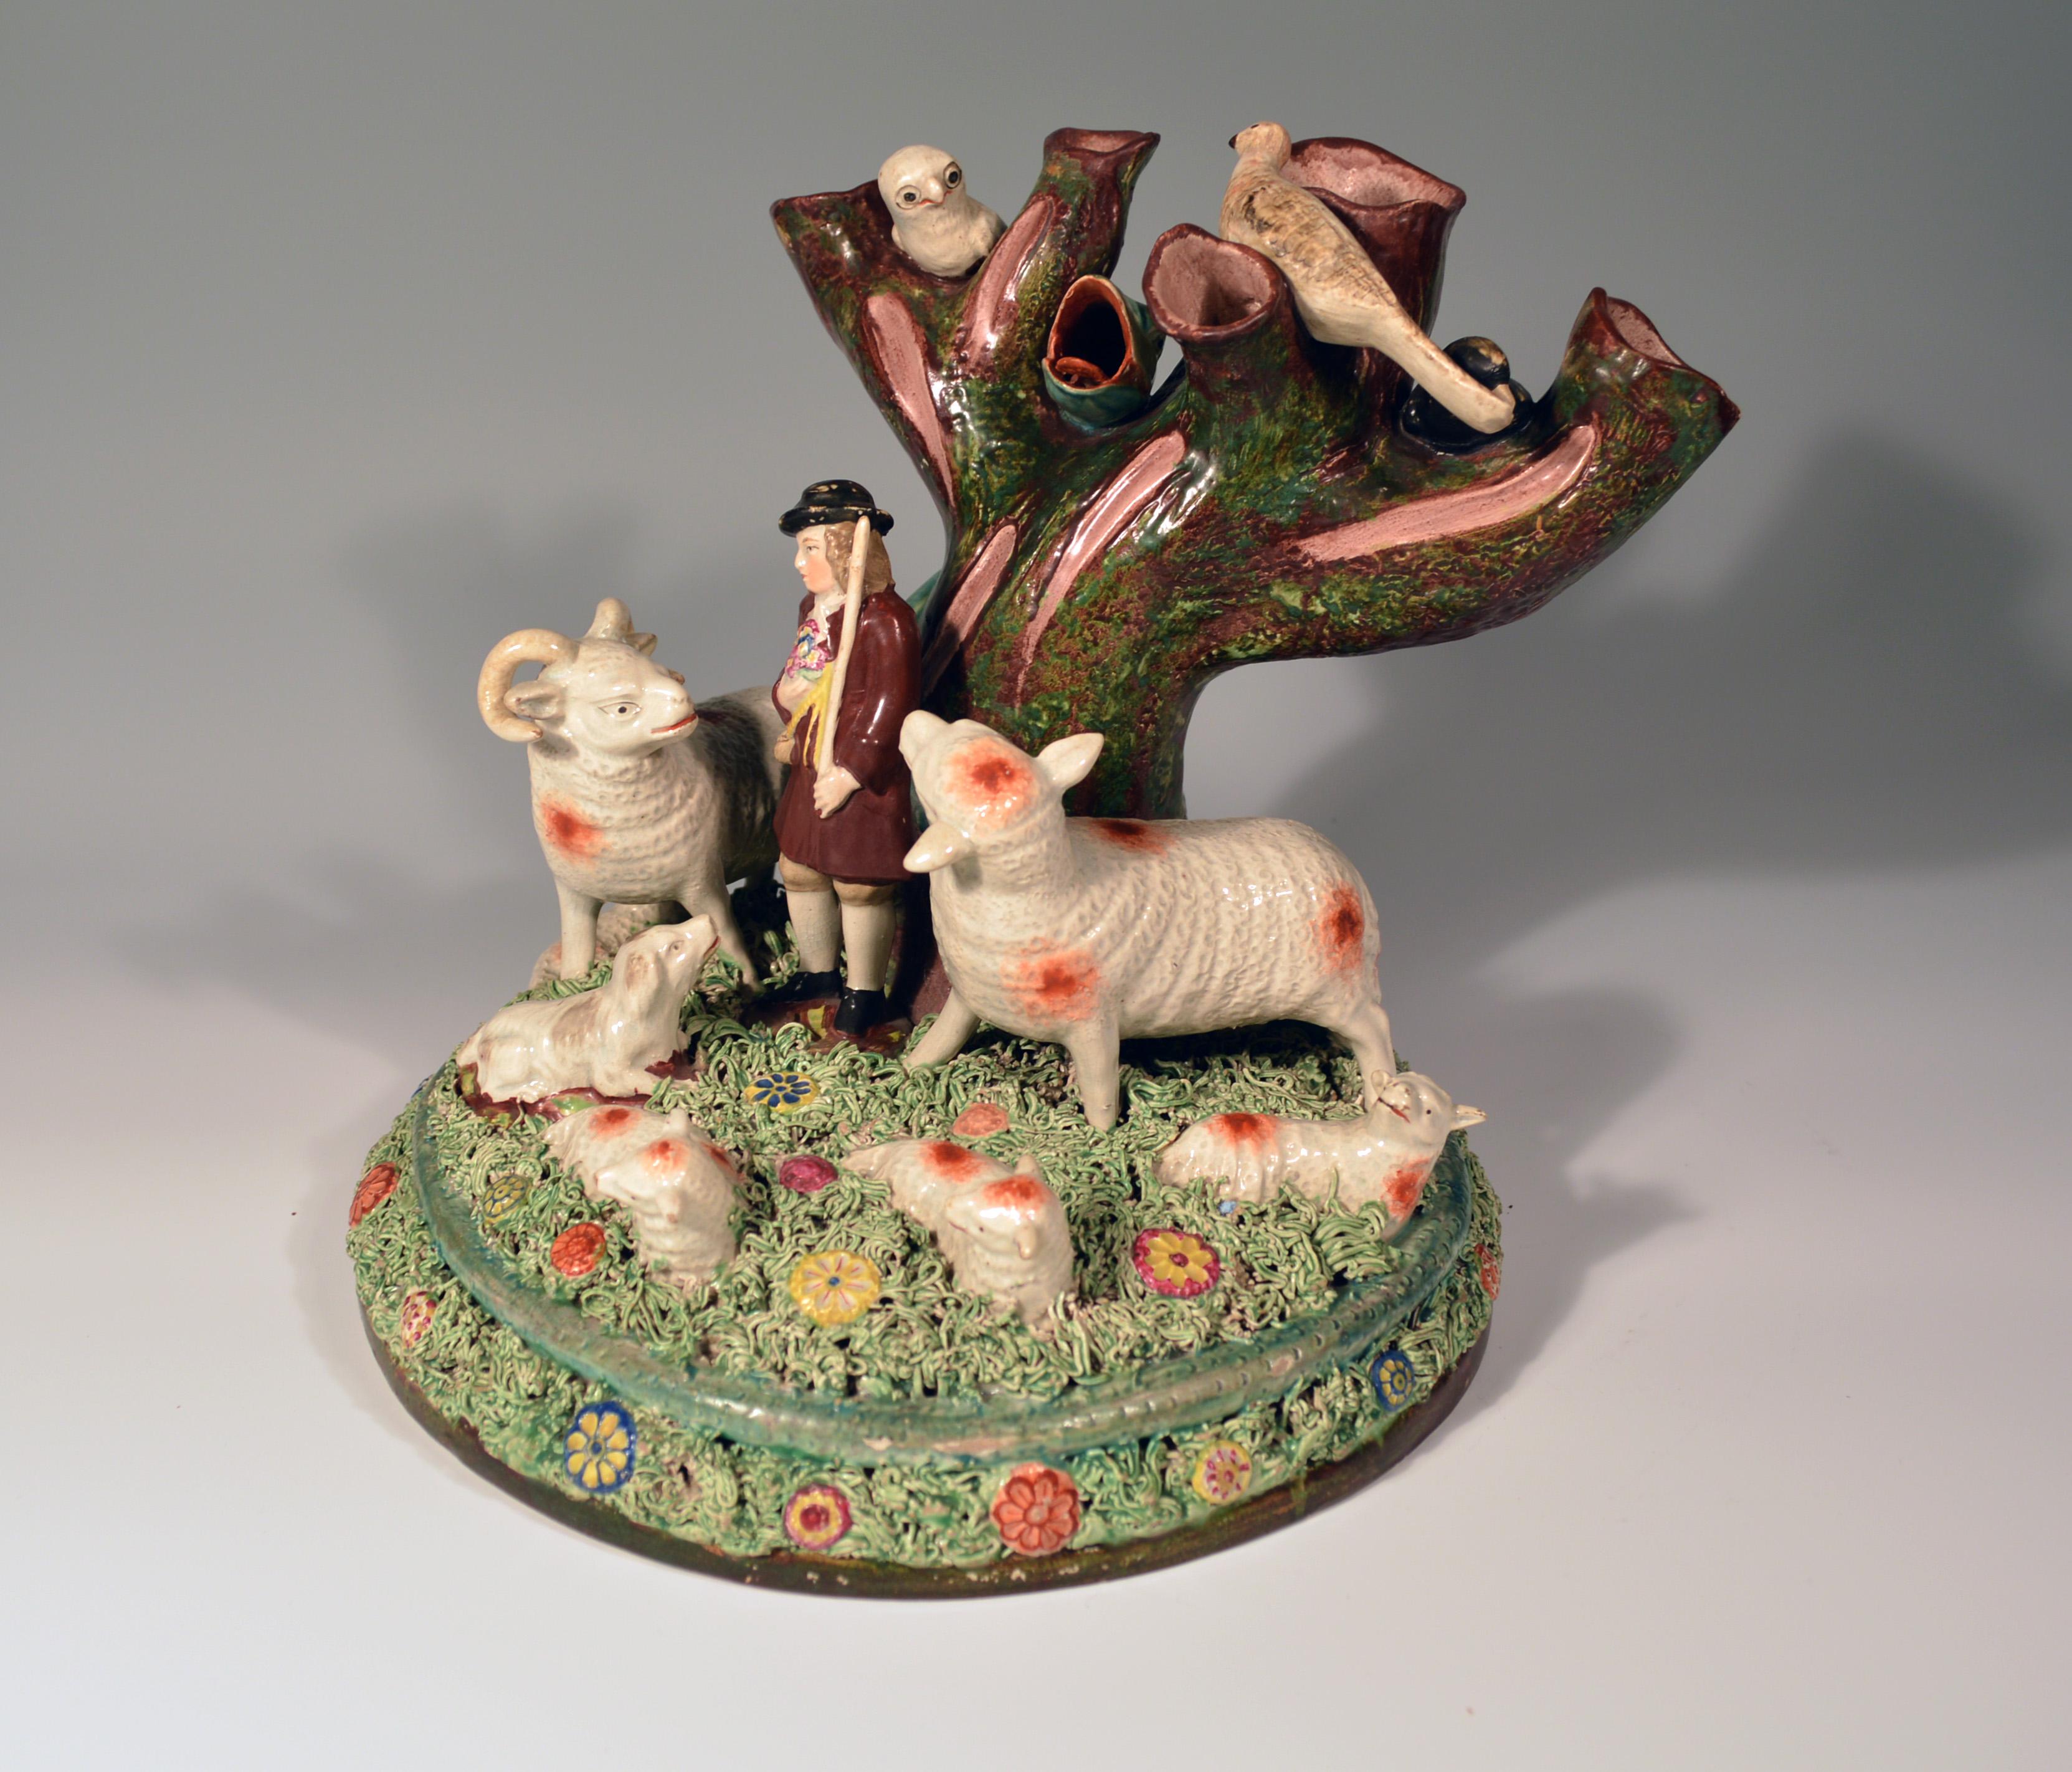 Staffordshire pearlware rare Pottery Group of Shepherd and Herd of Sheep, 
circa 1825

The extremely rare large figure group depicts a large central hollow tree at the back with three large oversized birds perched upon the thick branches, one of